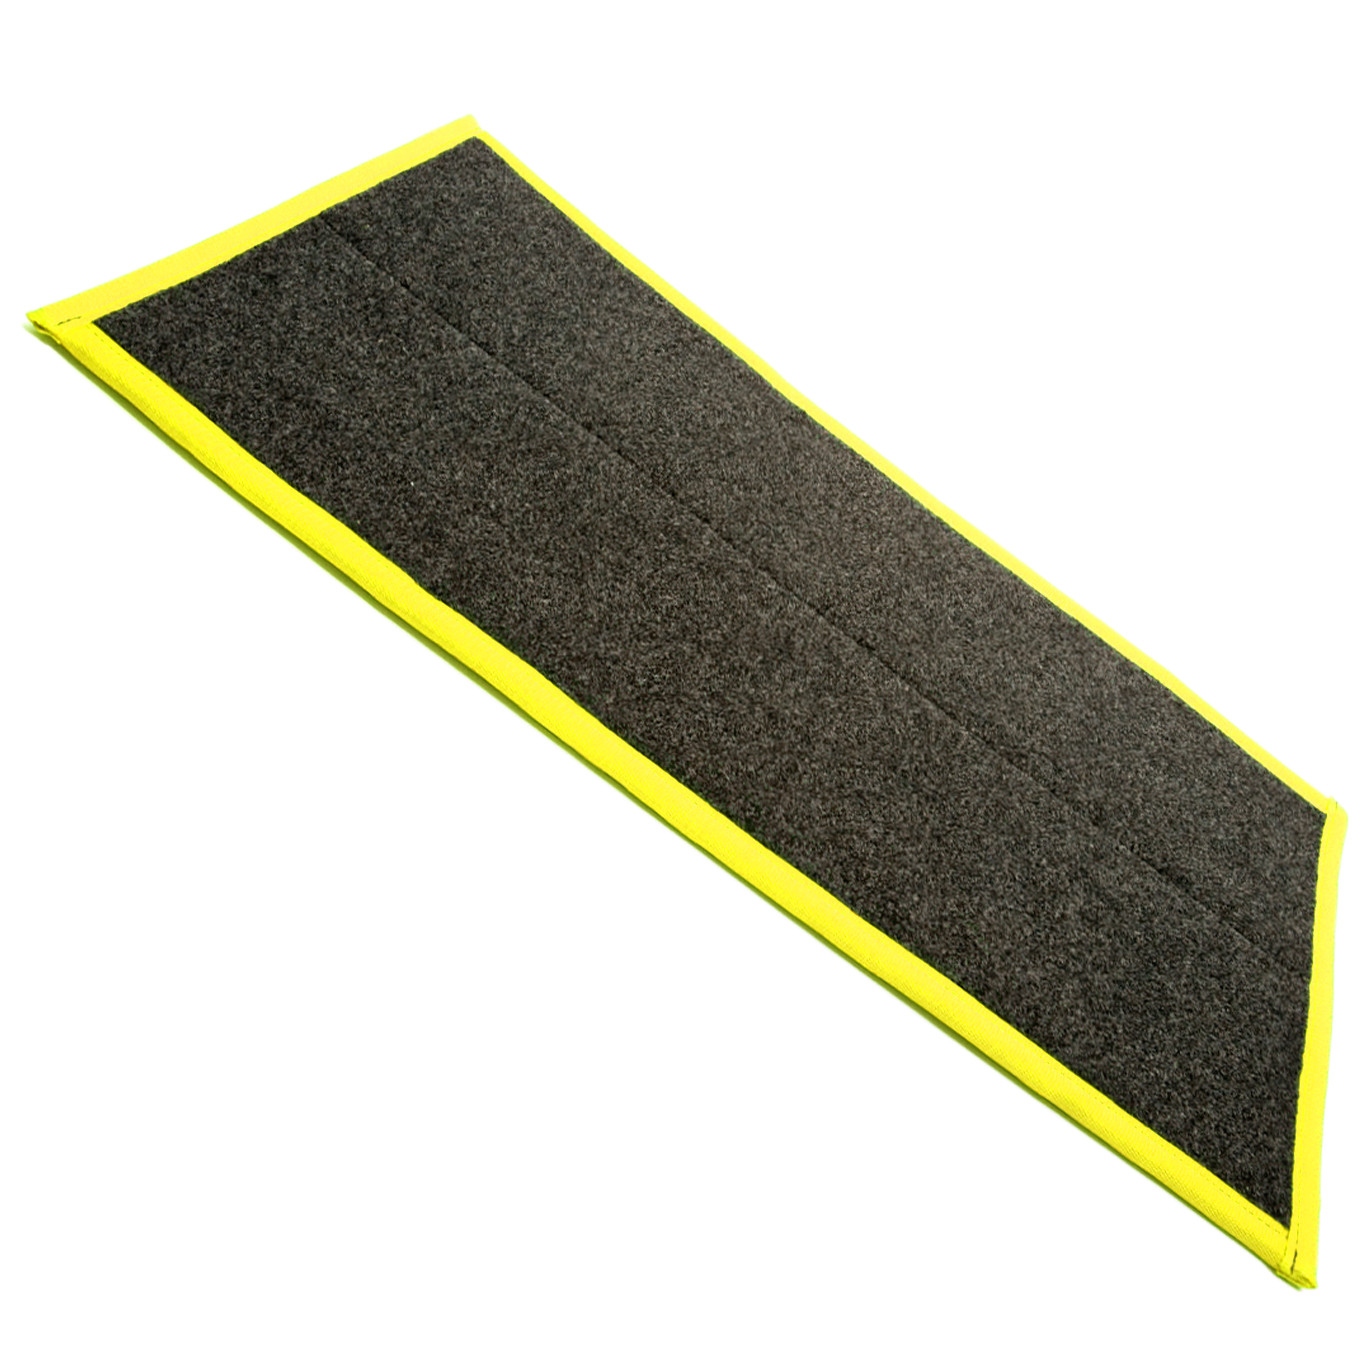 PureTrack Replacement Pad with Yellow Trim. Disinfecting Shoe Mat System.